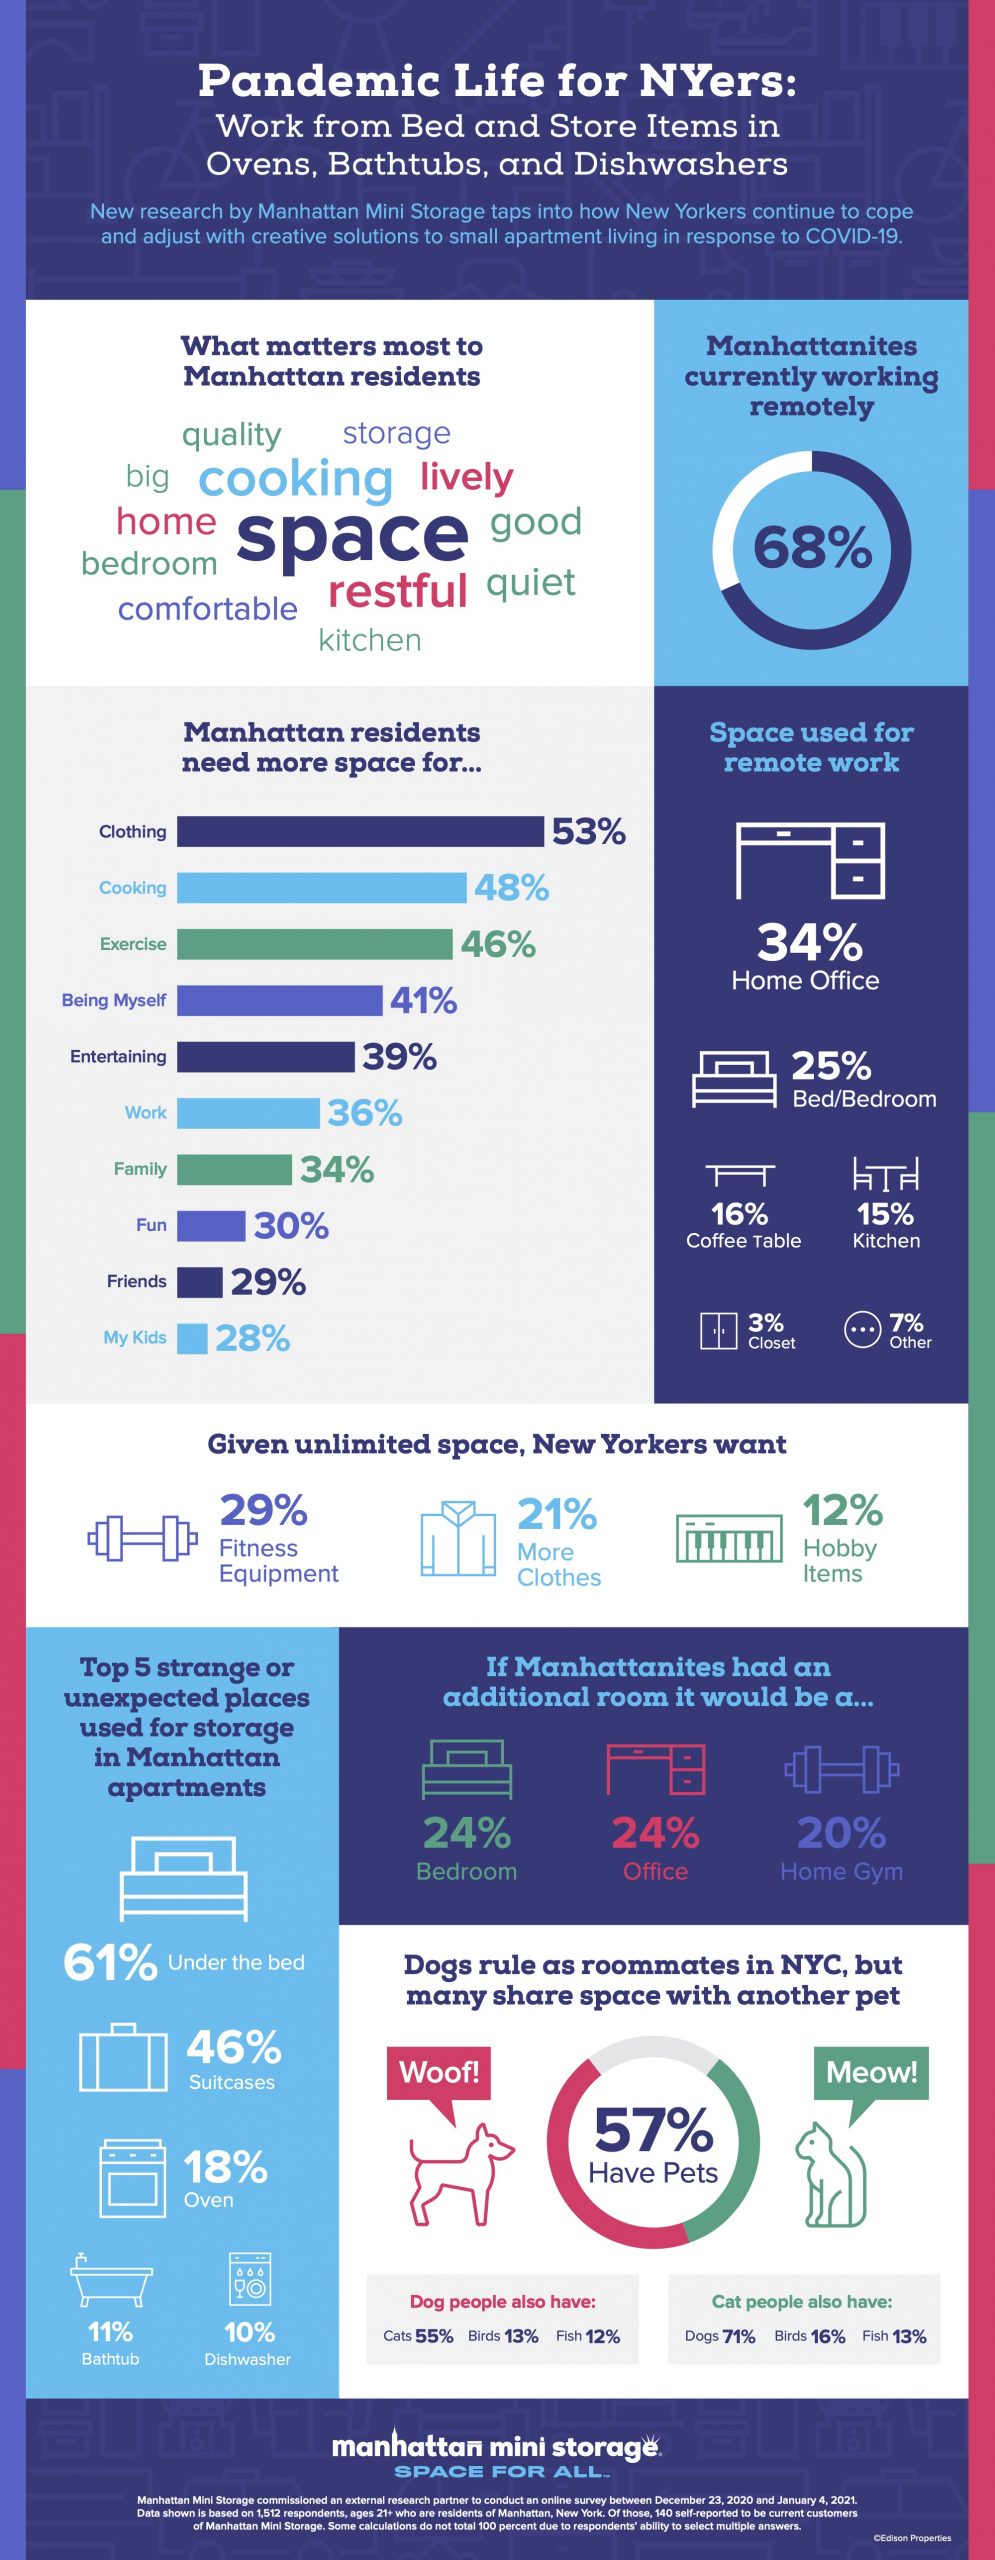 Apartment Living Survey Results: Space for What?